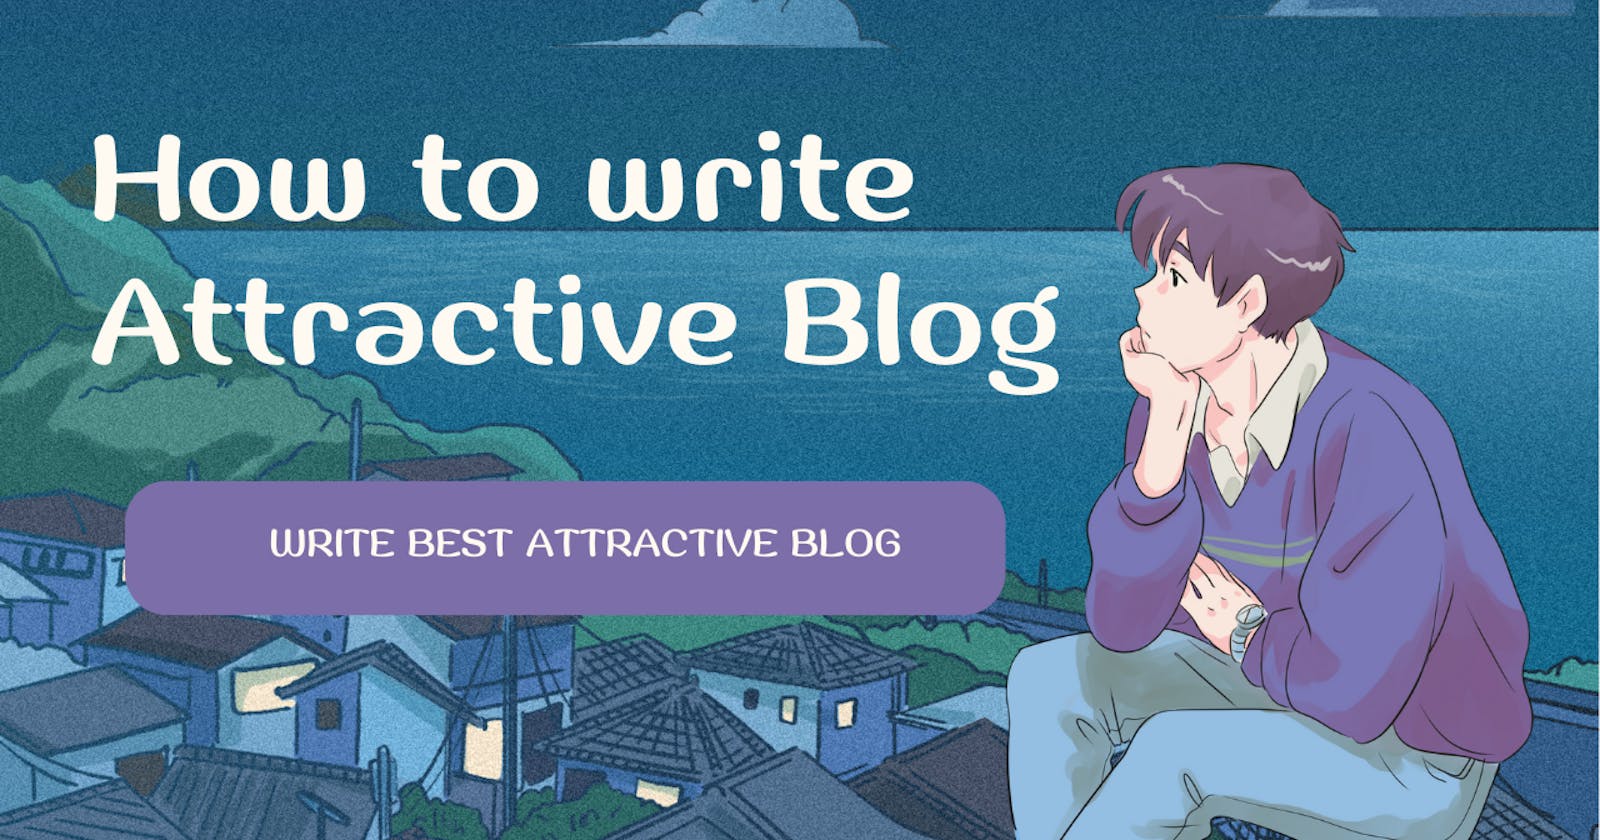 How to write Attractive Blog